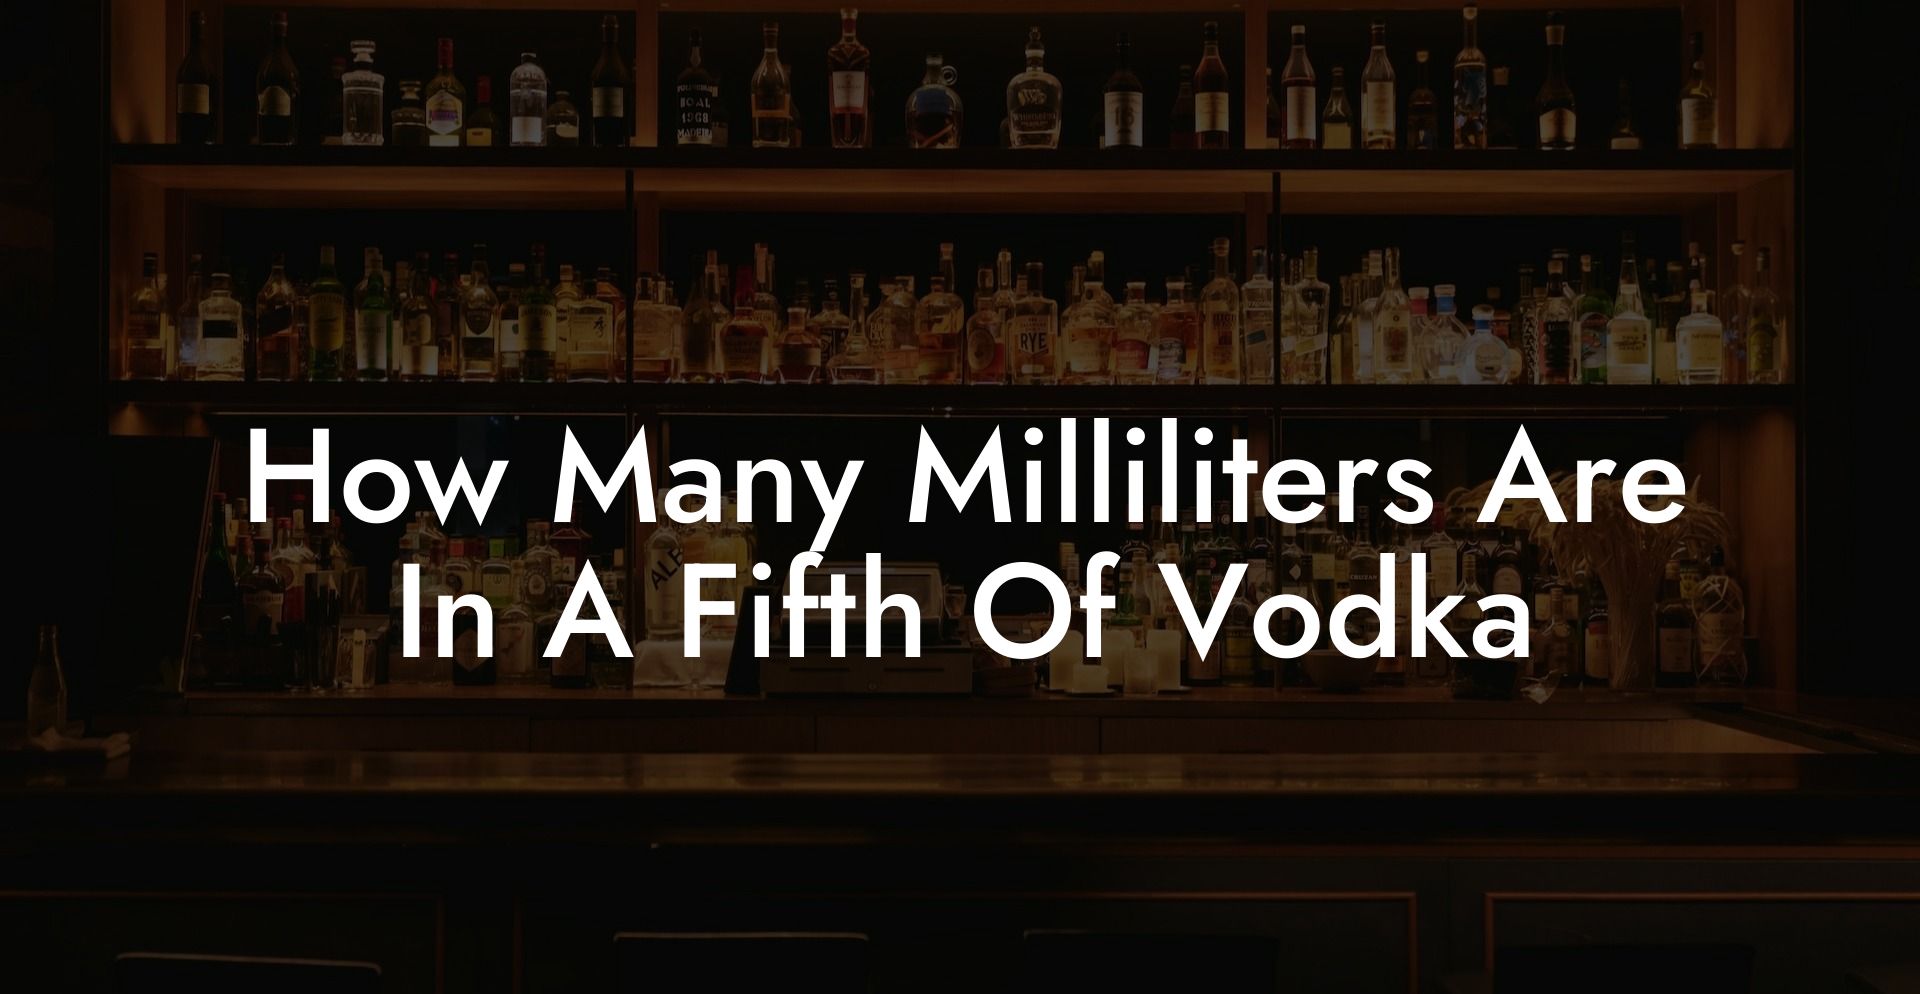 How Many Milliliters Are In A Fifth Of Vodka